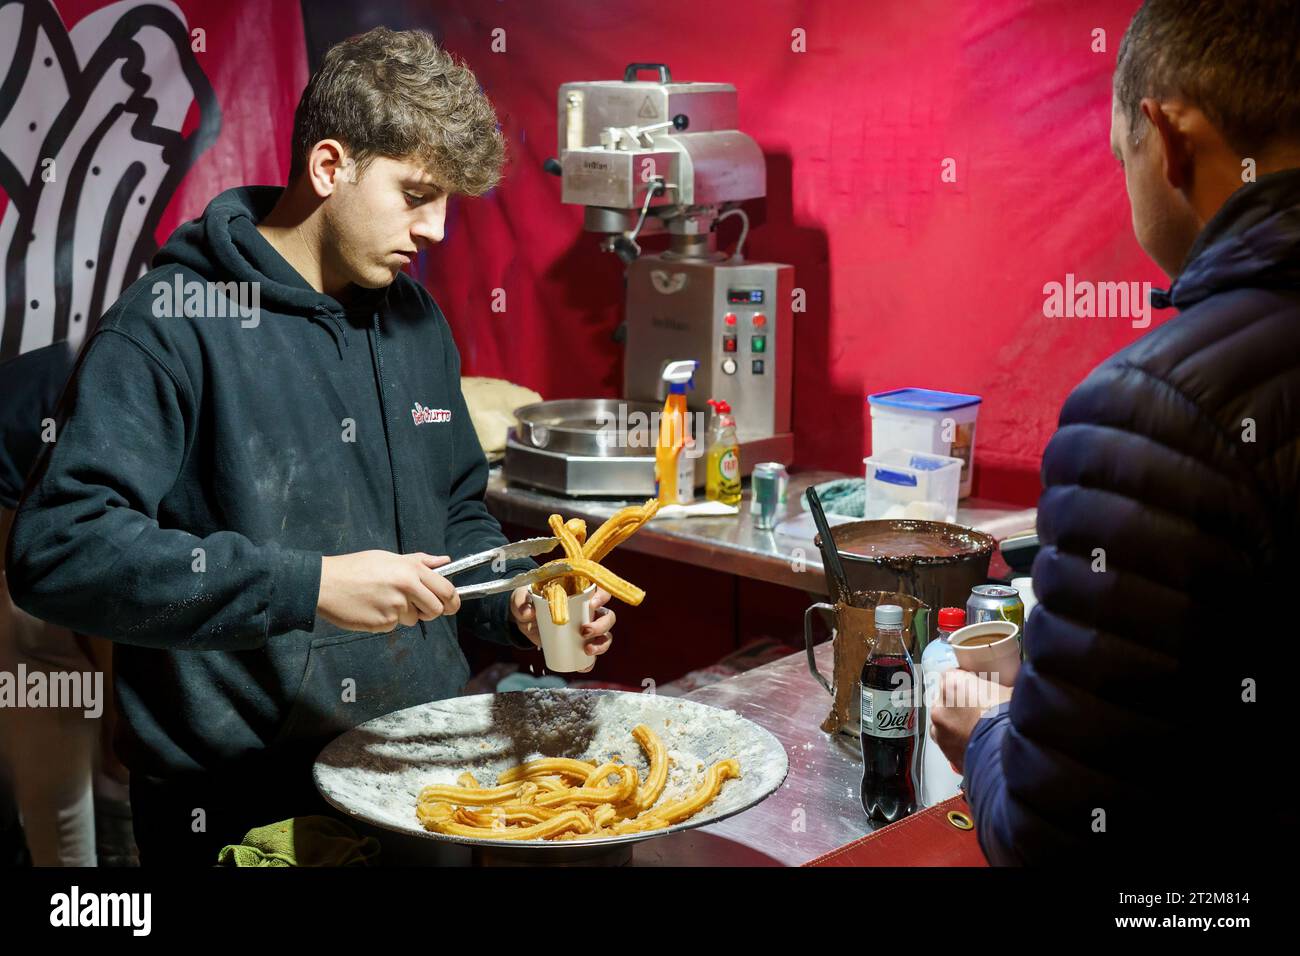 Male being served curly churros with chocolate sauce in a cup, freshly made in a wok at a Christmas market stand, Harrogate,Yorkshire, UK. Stock Photo